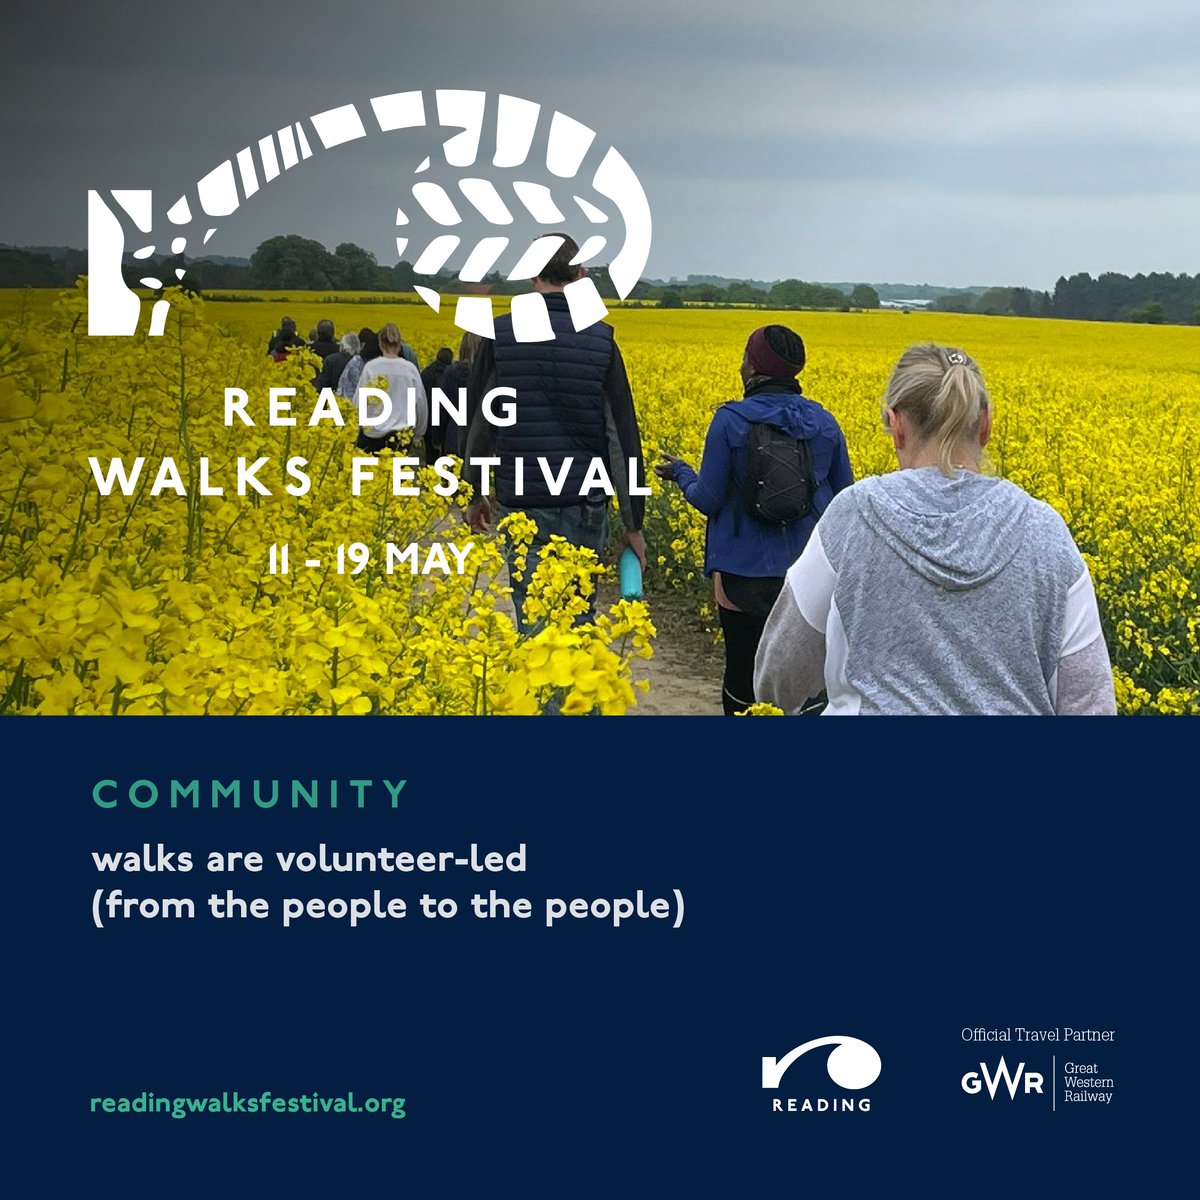 Have you heard our latest #podcast? We've got festival fever as we catch up with Molli from @UniofReading ahead of their Community Festival next weekend - and Alex from #ReadingWalksFest, which kicks off tomorrow! No better time to listen, then whatsonreading.com/podcast